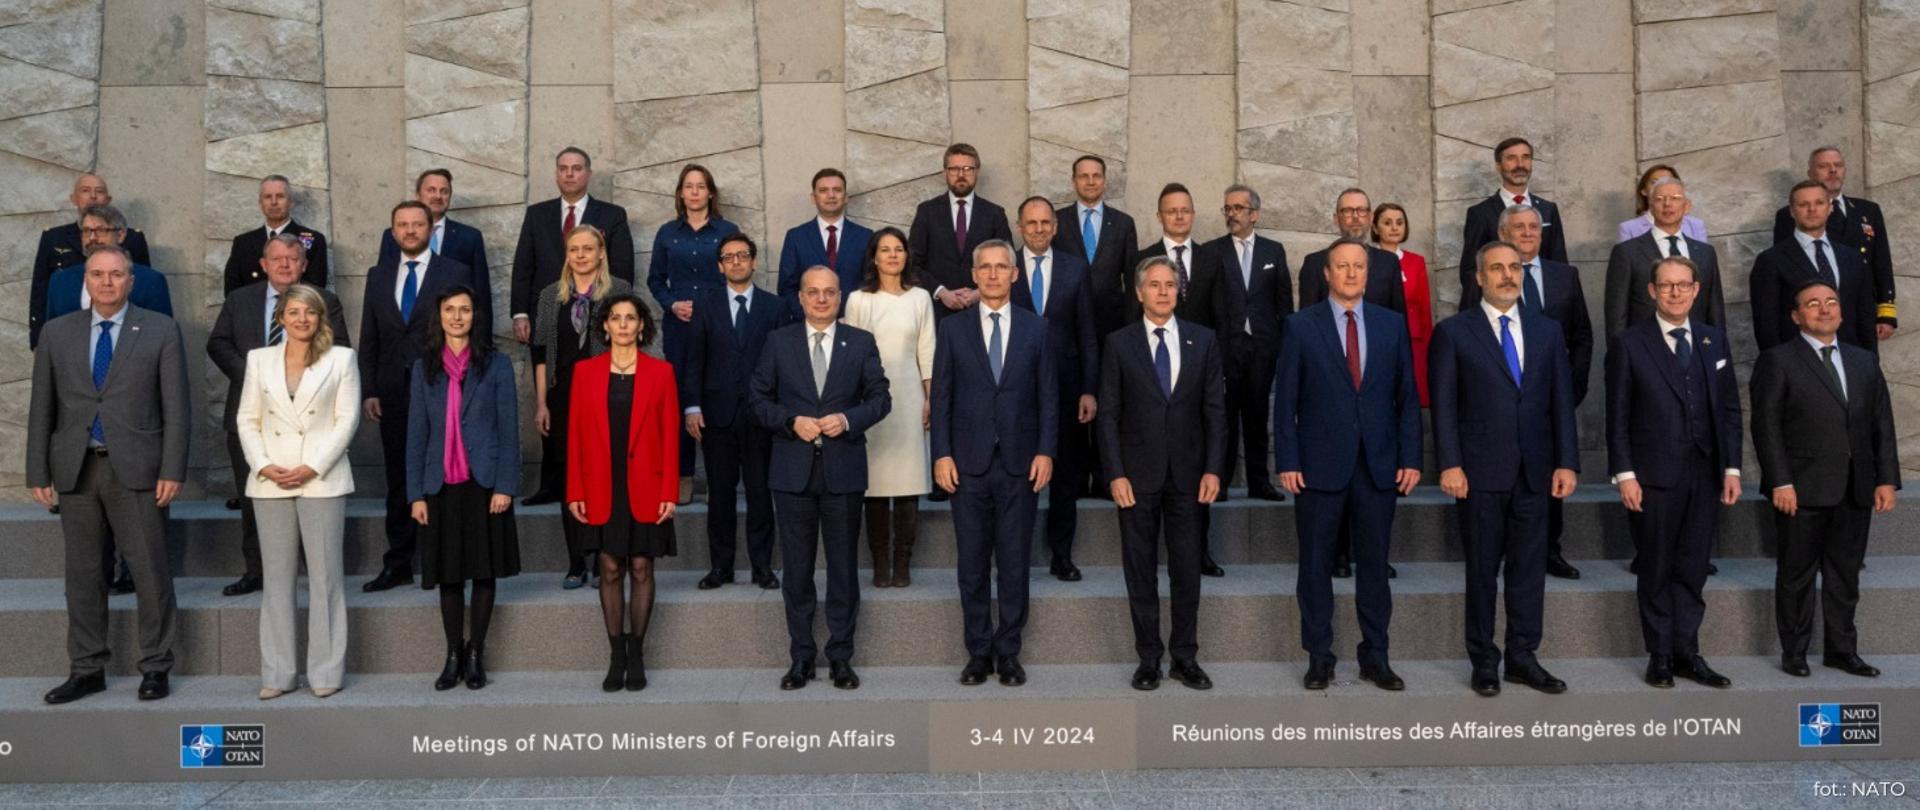 Meeting of NATO foreign ministers